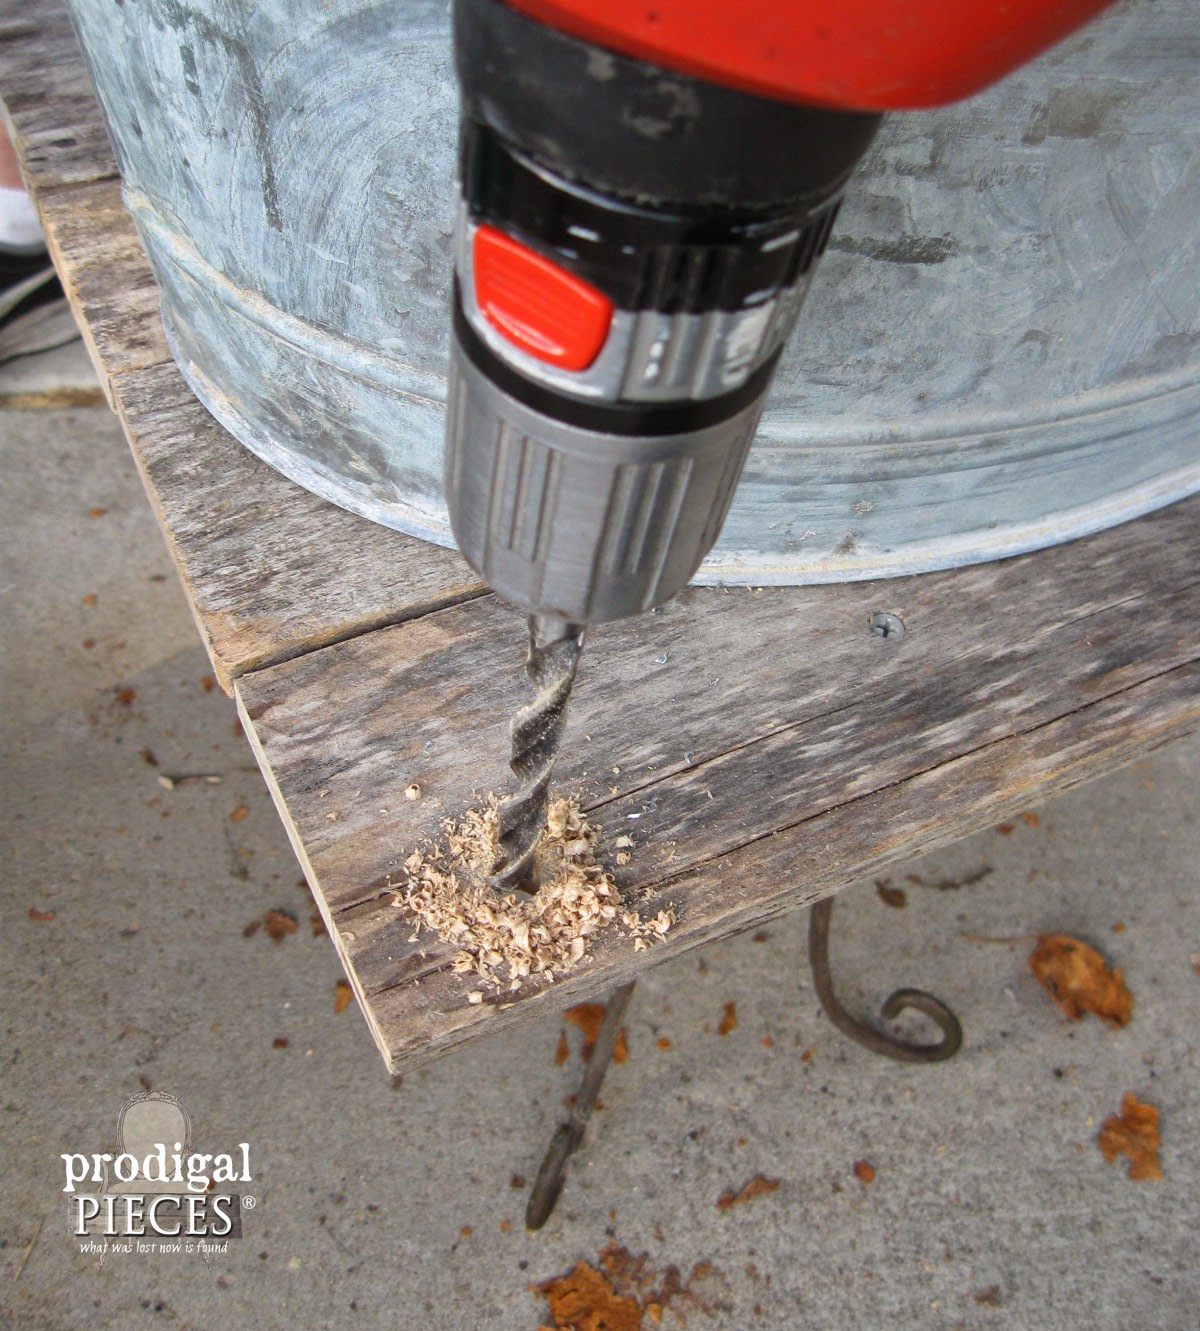 Drilling Beverage Stand Tutorial by Prodigal Pieces | prodigalpieces.com